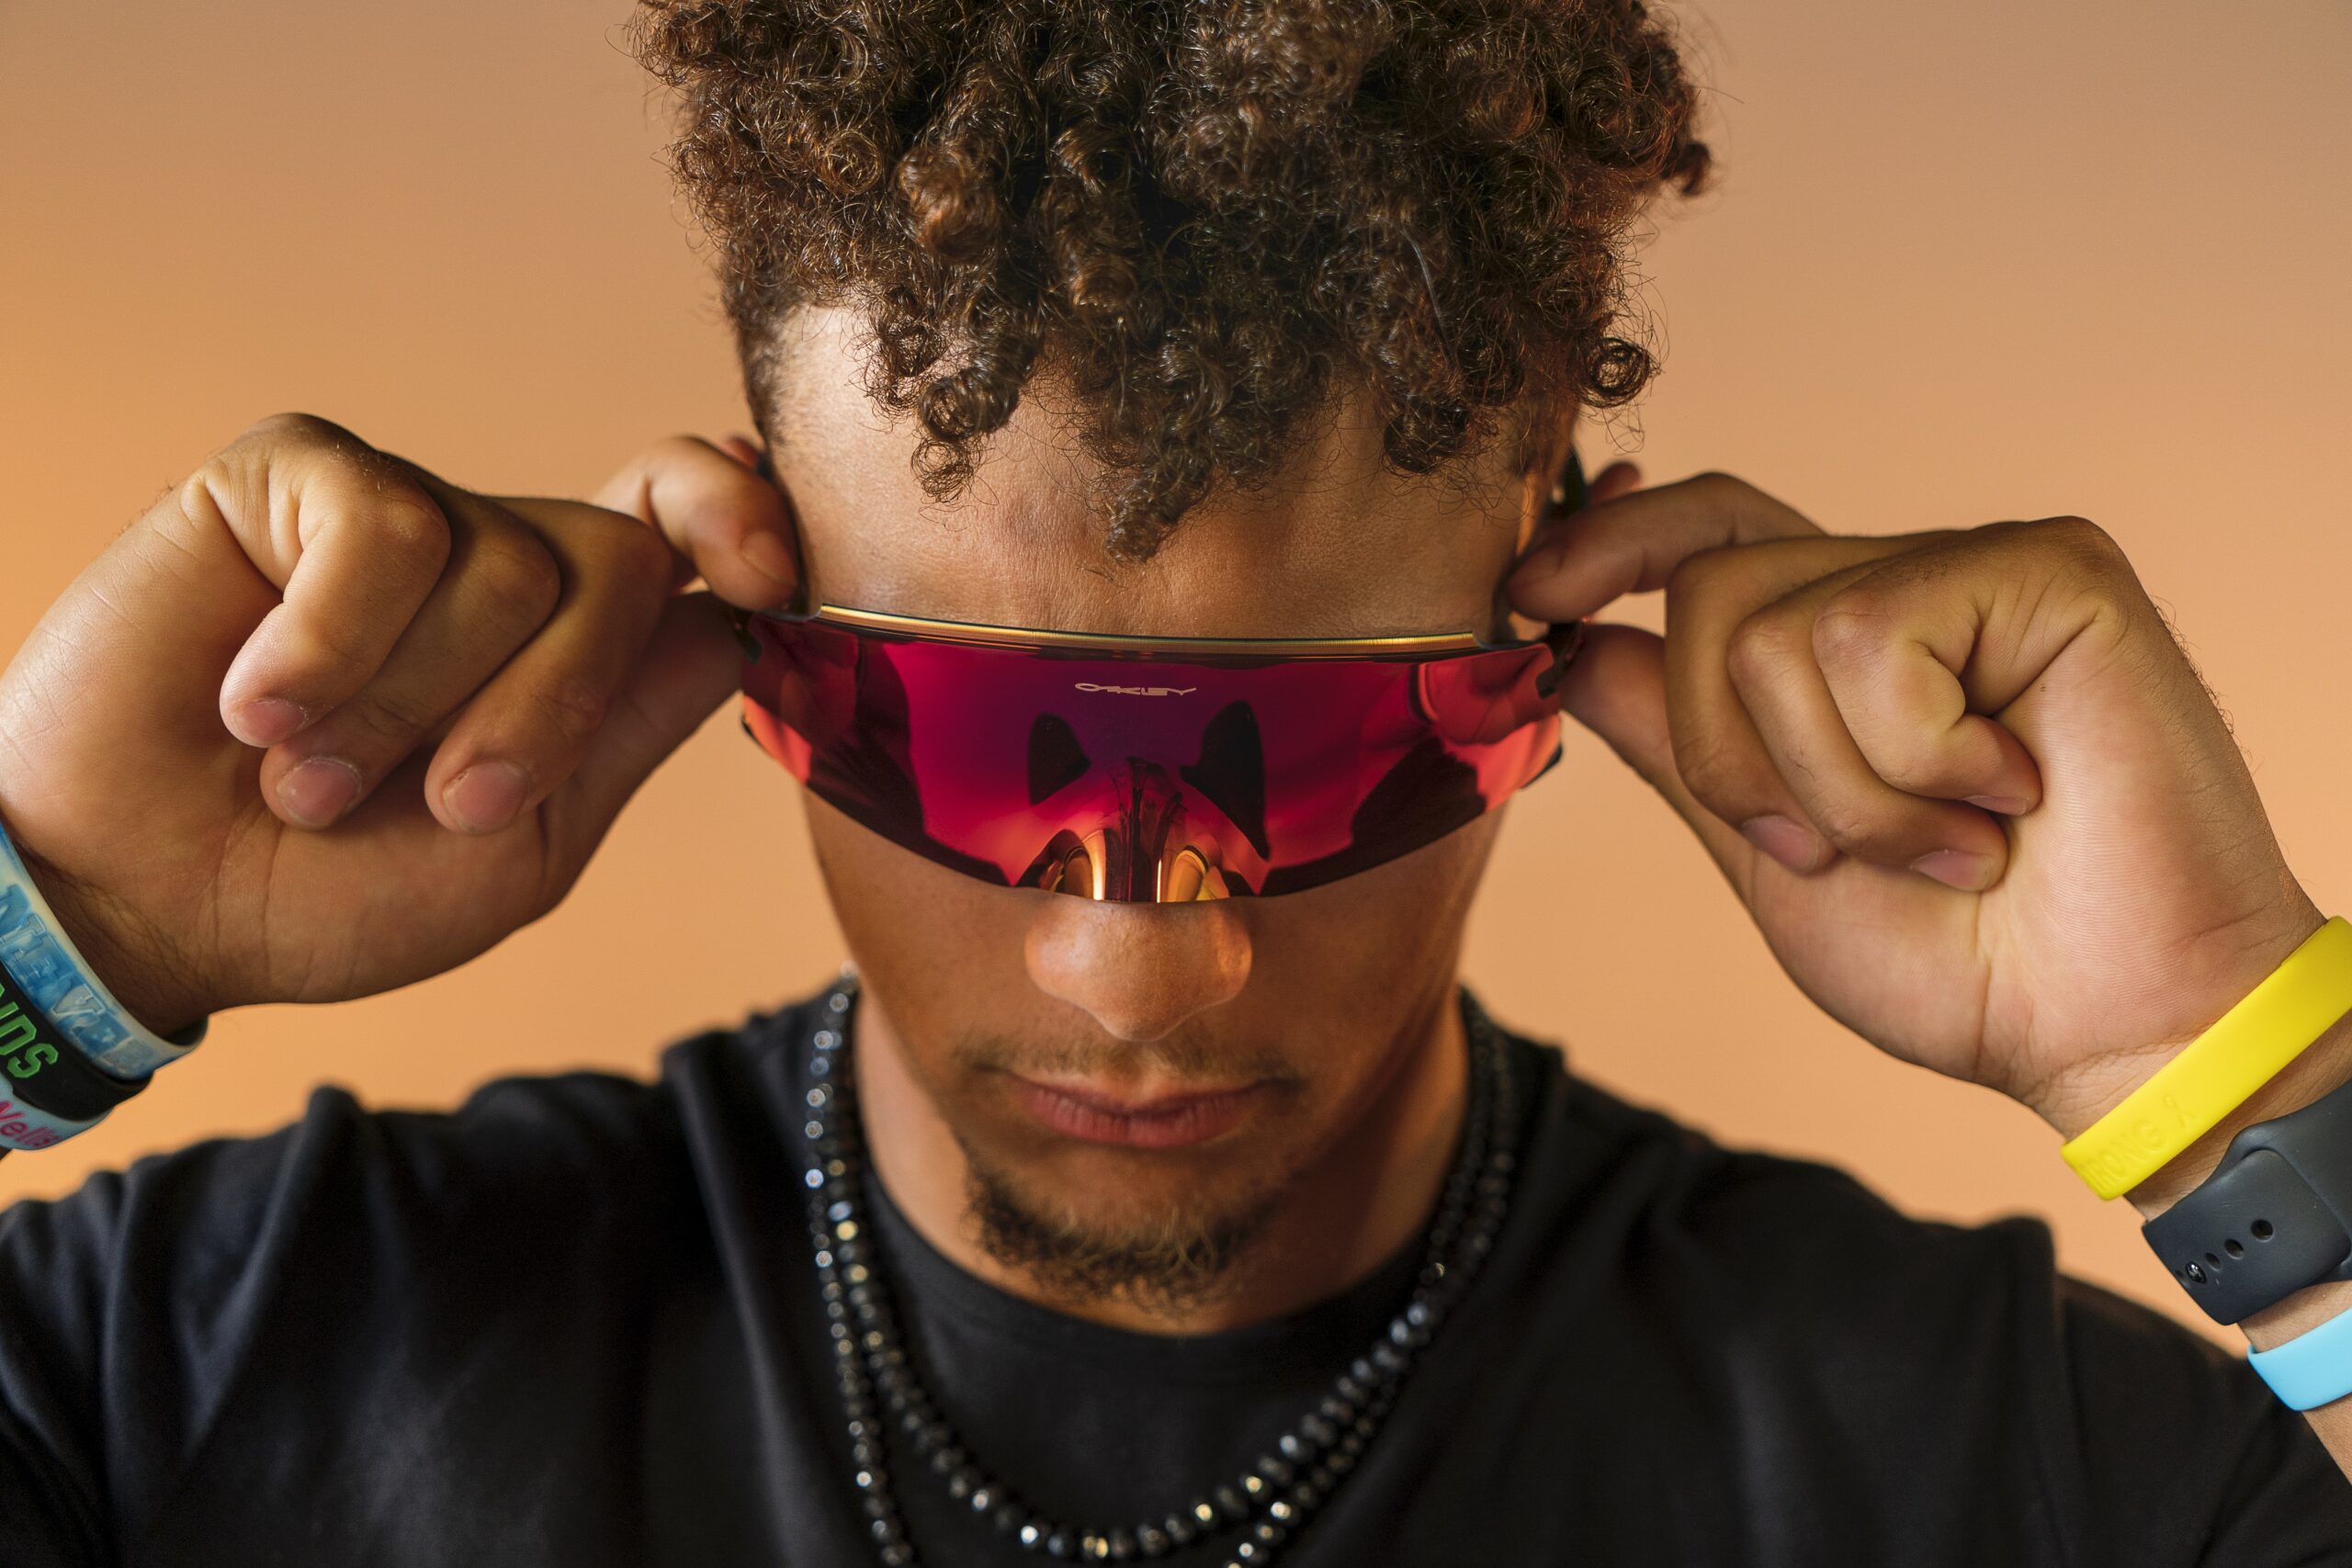 Oakley's new frameless sunglasses are strong enough for Olympic athletes